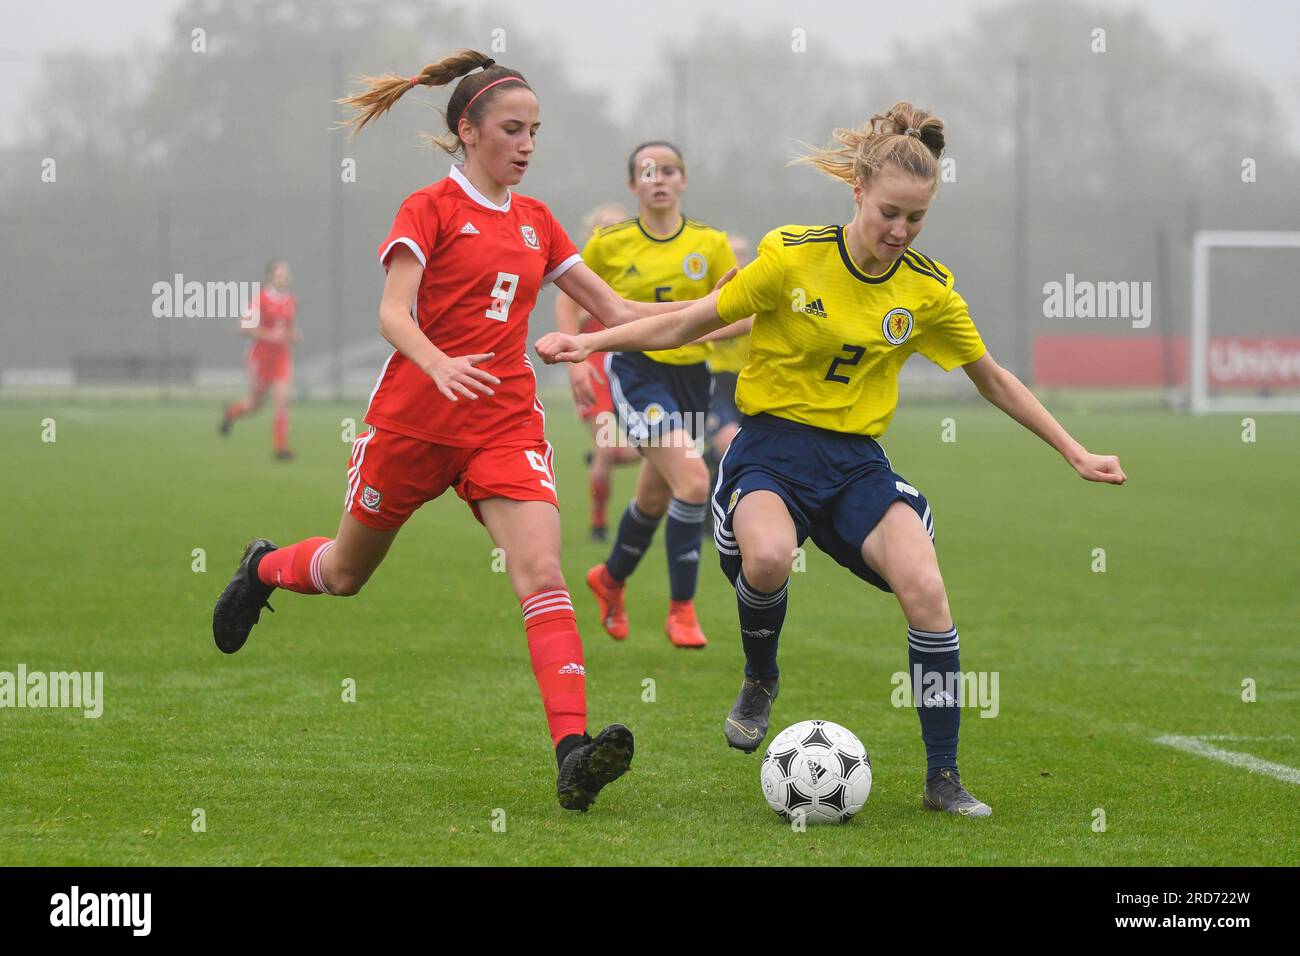 Newport, Wales. 23 October 2019. Georgia Gray of Scotland shields the ball from Olivia Francis of Wales during the Under 15 Girls Friendly International match between Wales and Scotland at Dragon Park in Newport, Wales, UK on 23 October 2019. Credit: Duncan Thomas/Majestic Media. Stock Photo